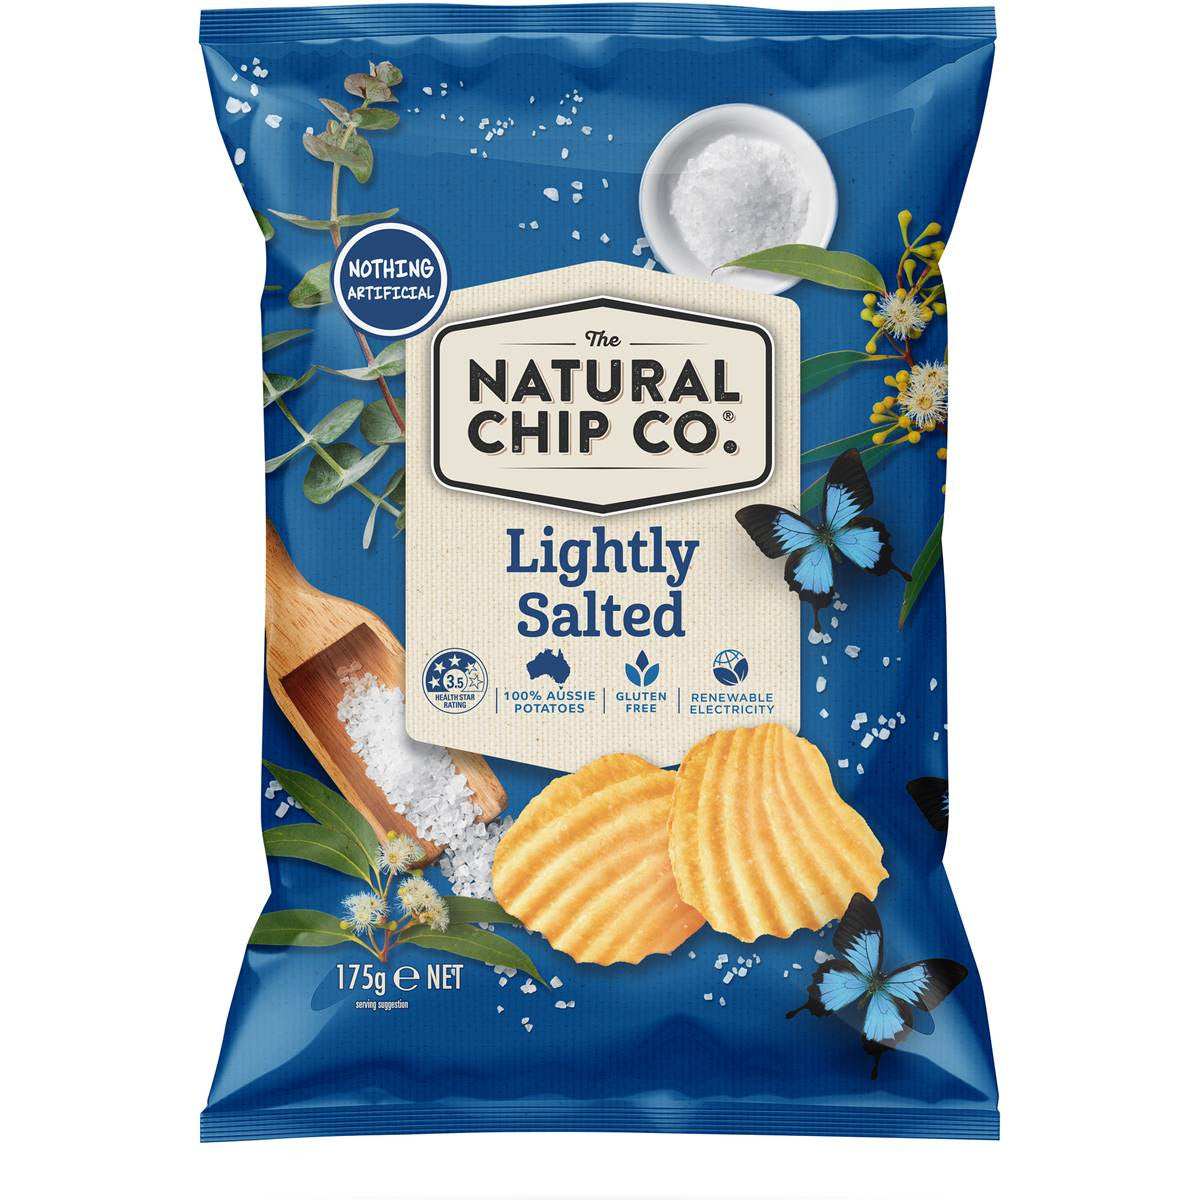 The Natural Chip Co Lightly Salted 175g